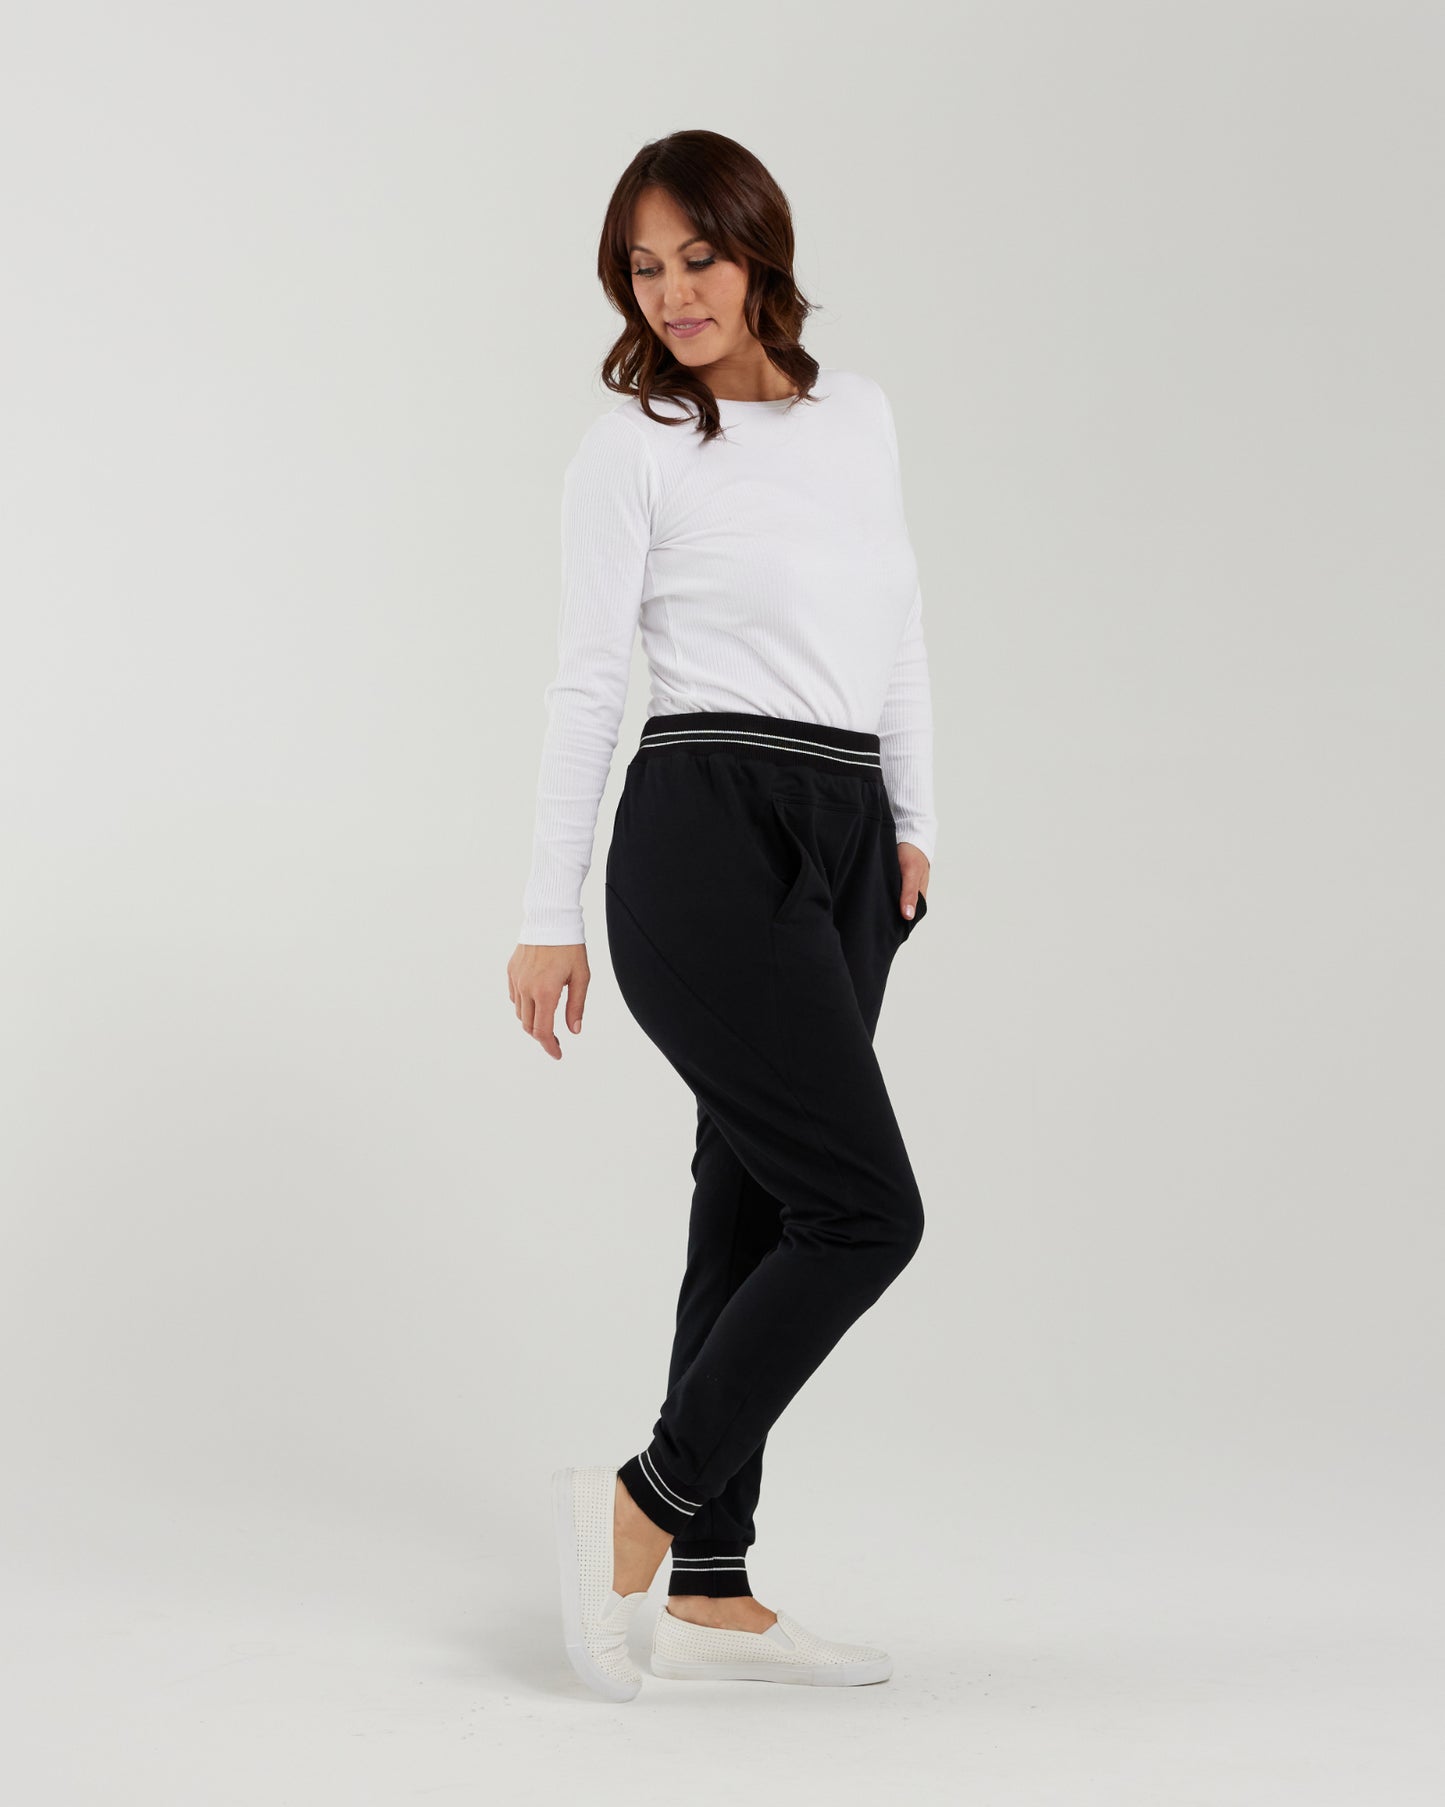 Zafina - Alice Pant Pull On Pant - Black - Due 1st March